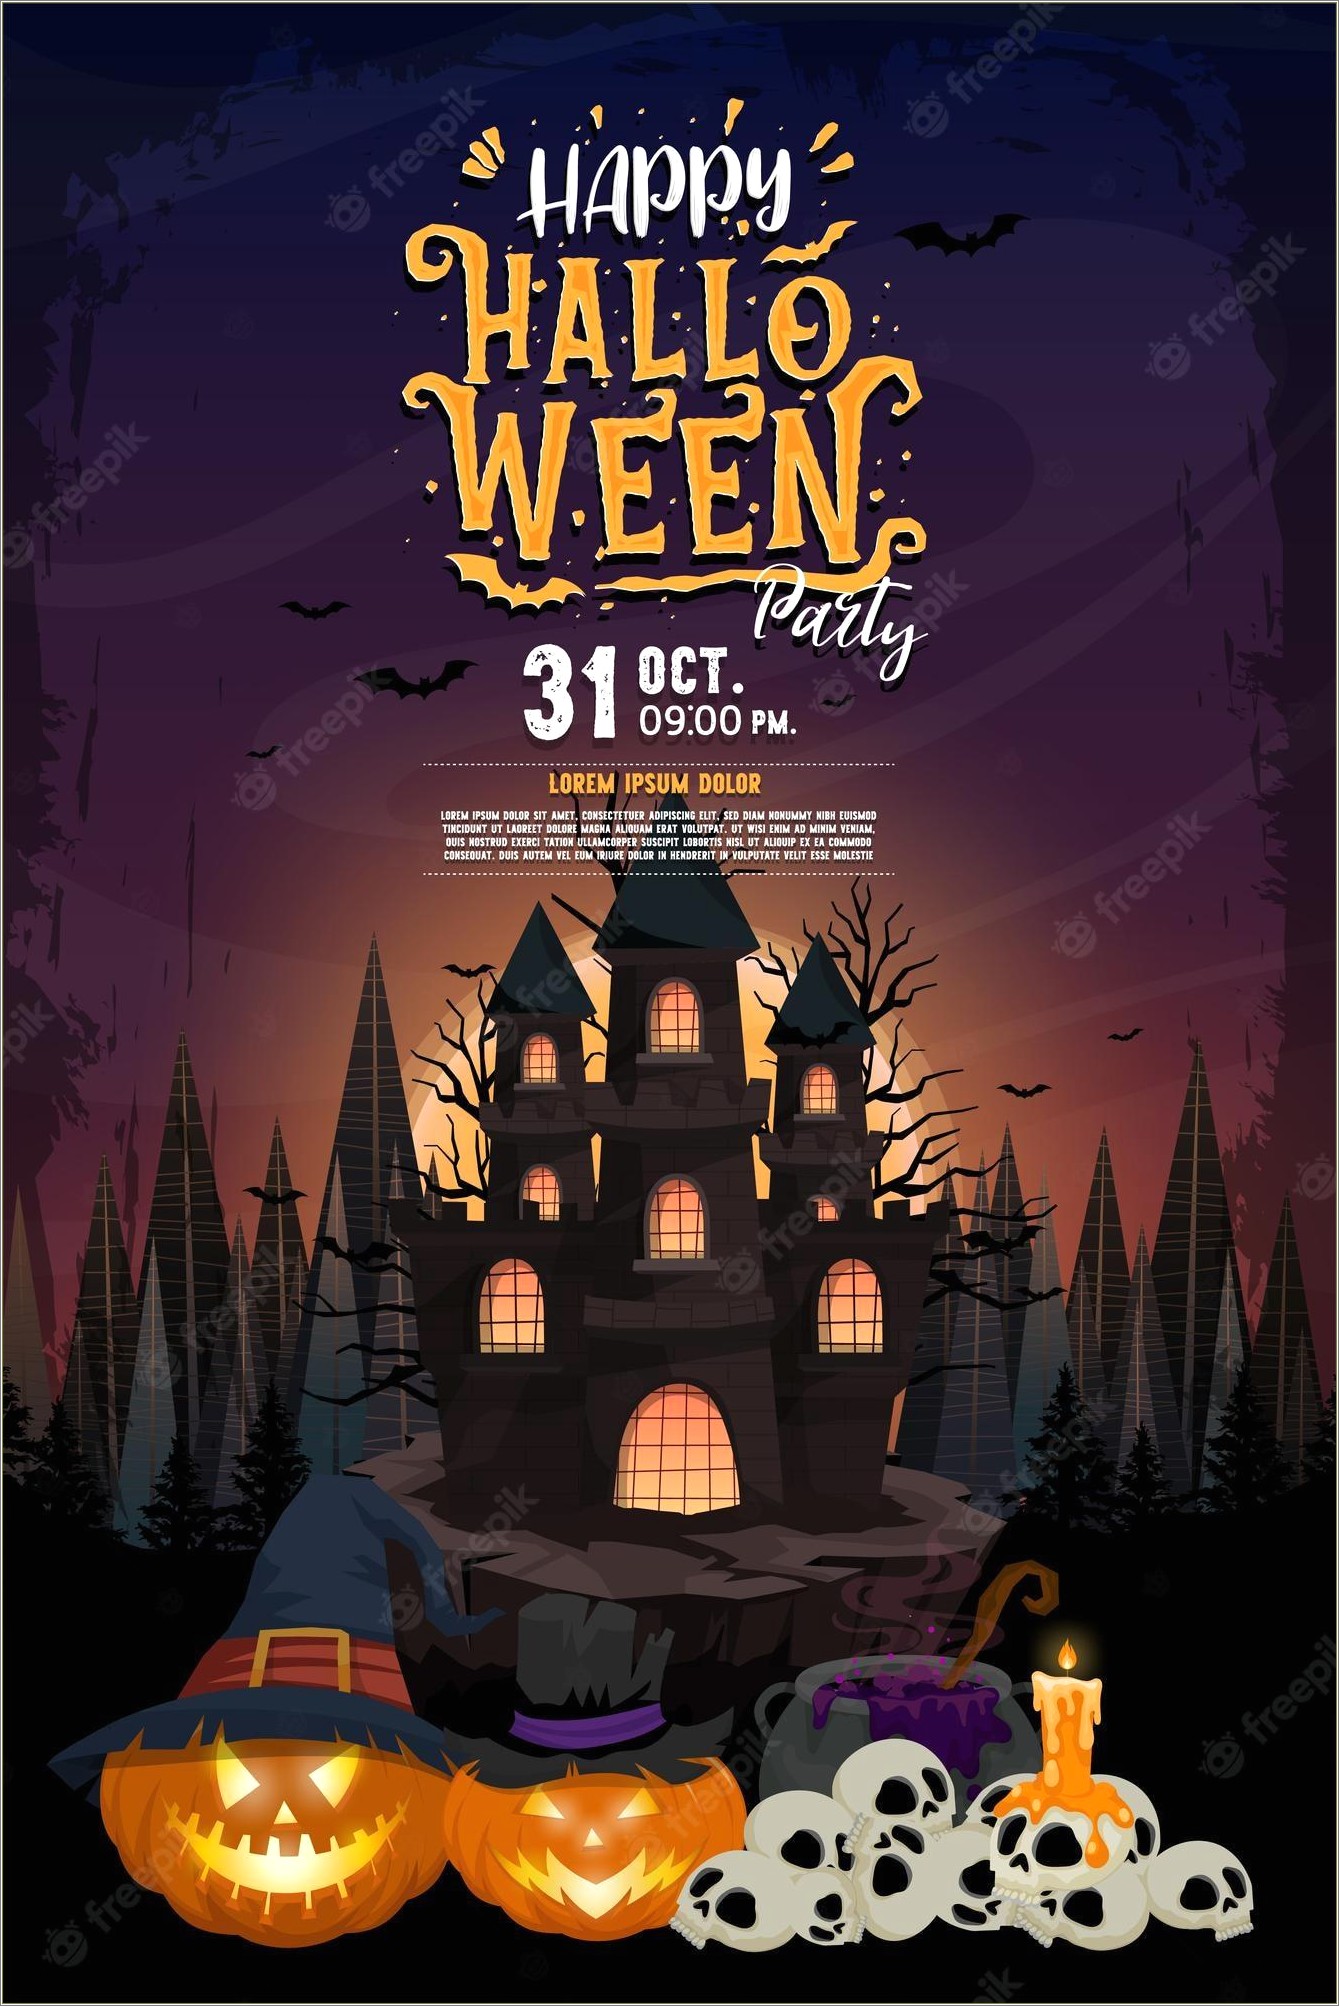 Halloween Party Invitation Card Template Free Download